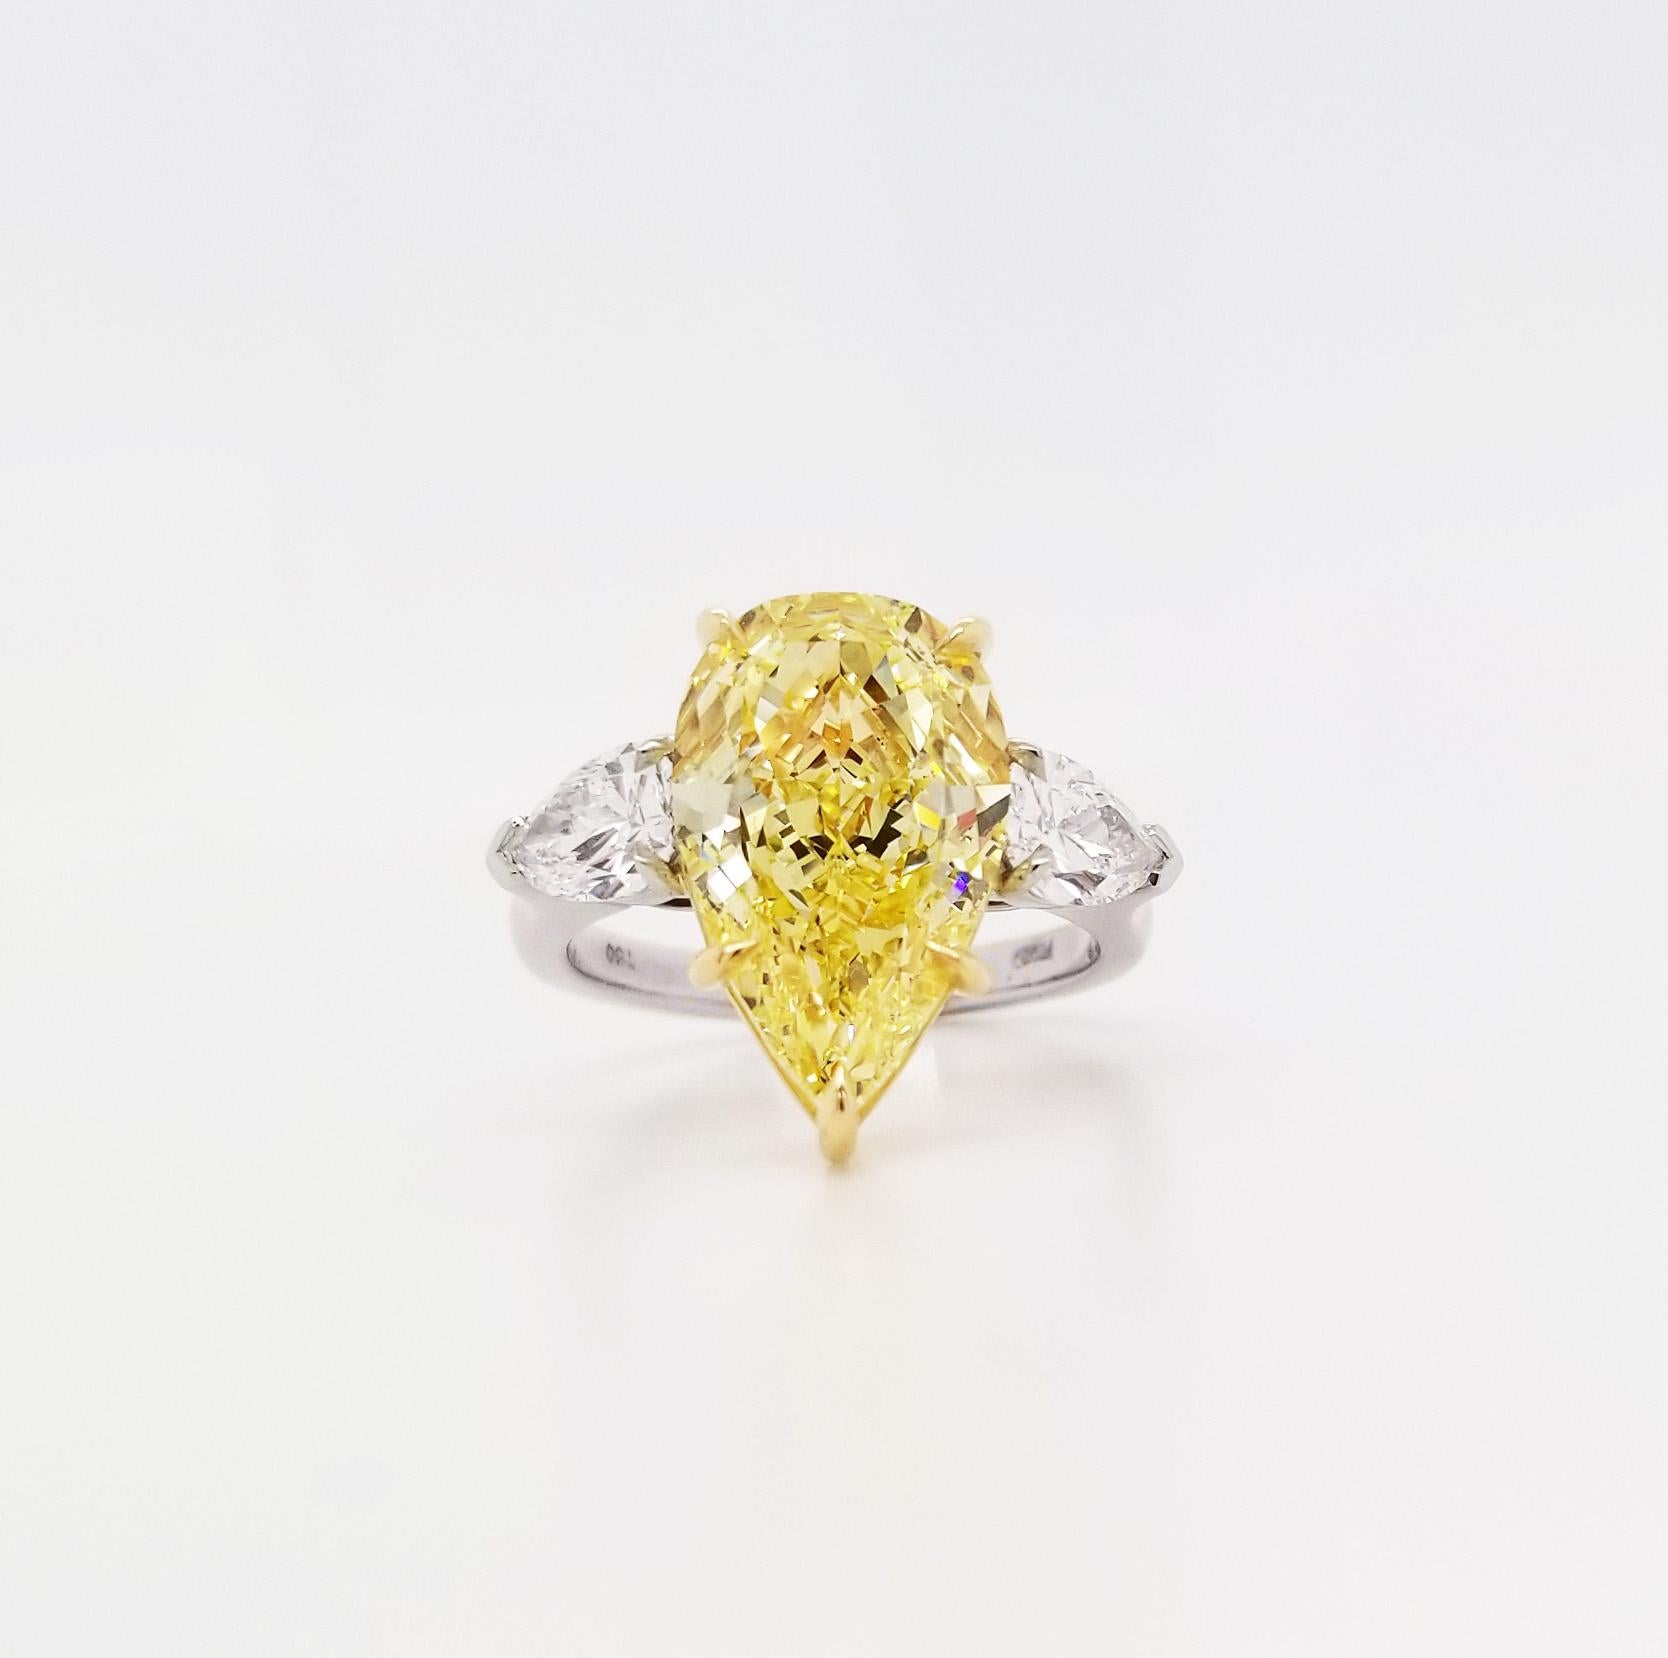 From SCARSELLI, this 5-carat Fancy Yellow Pear shape Cut Diamond is GIA certified (see certificate picture for detailed stone information). The diamond is flanked by a pair of pear shape  1.01 carats together VS clarity. This ring may be sized with